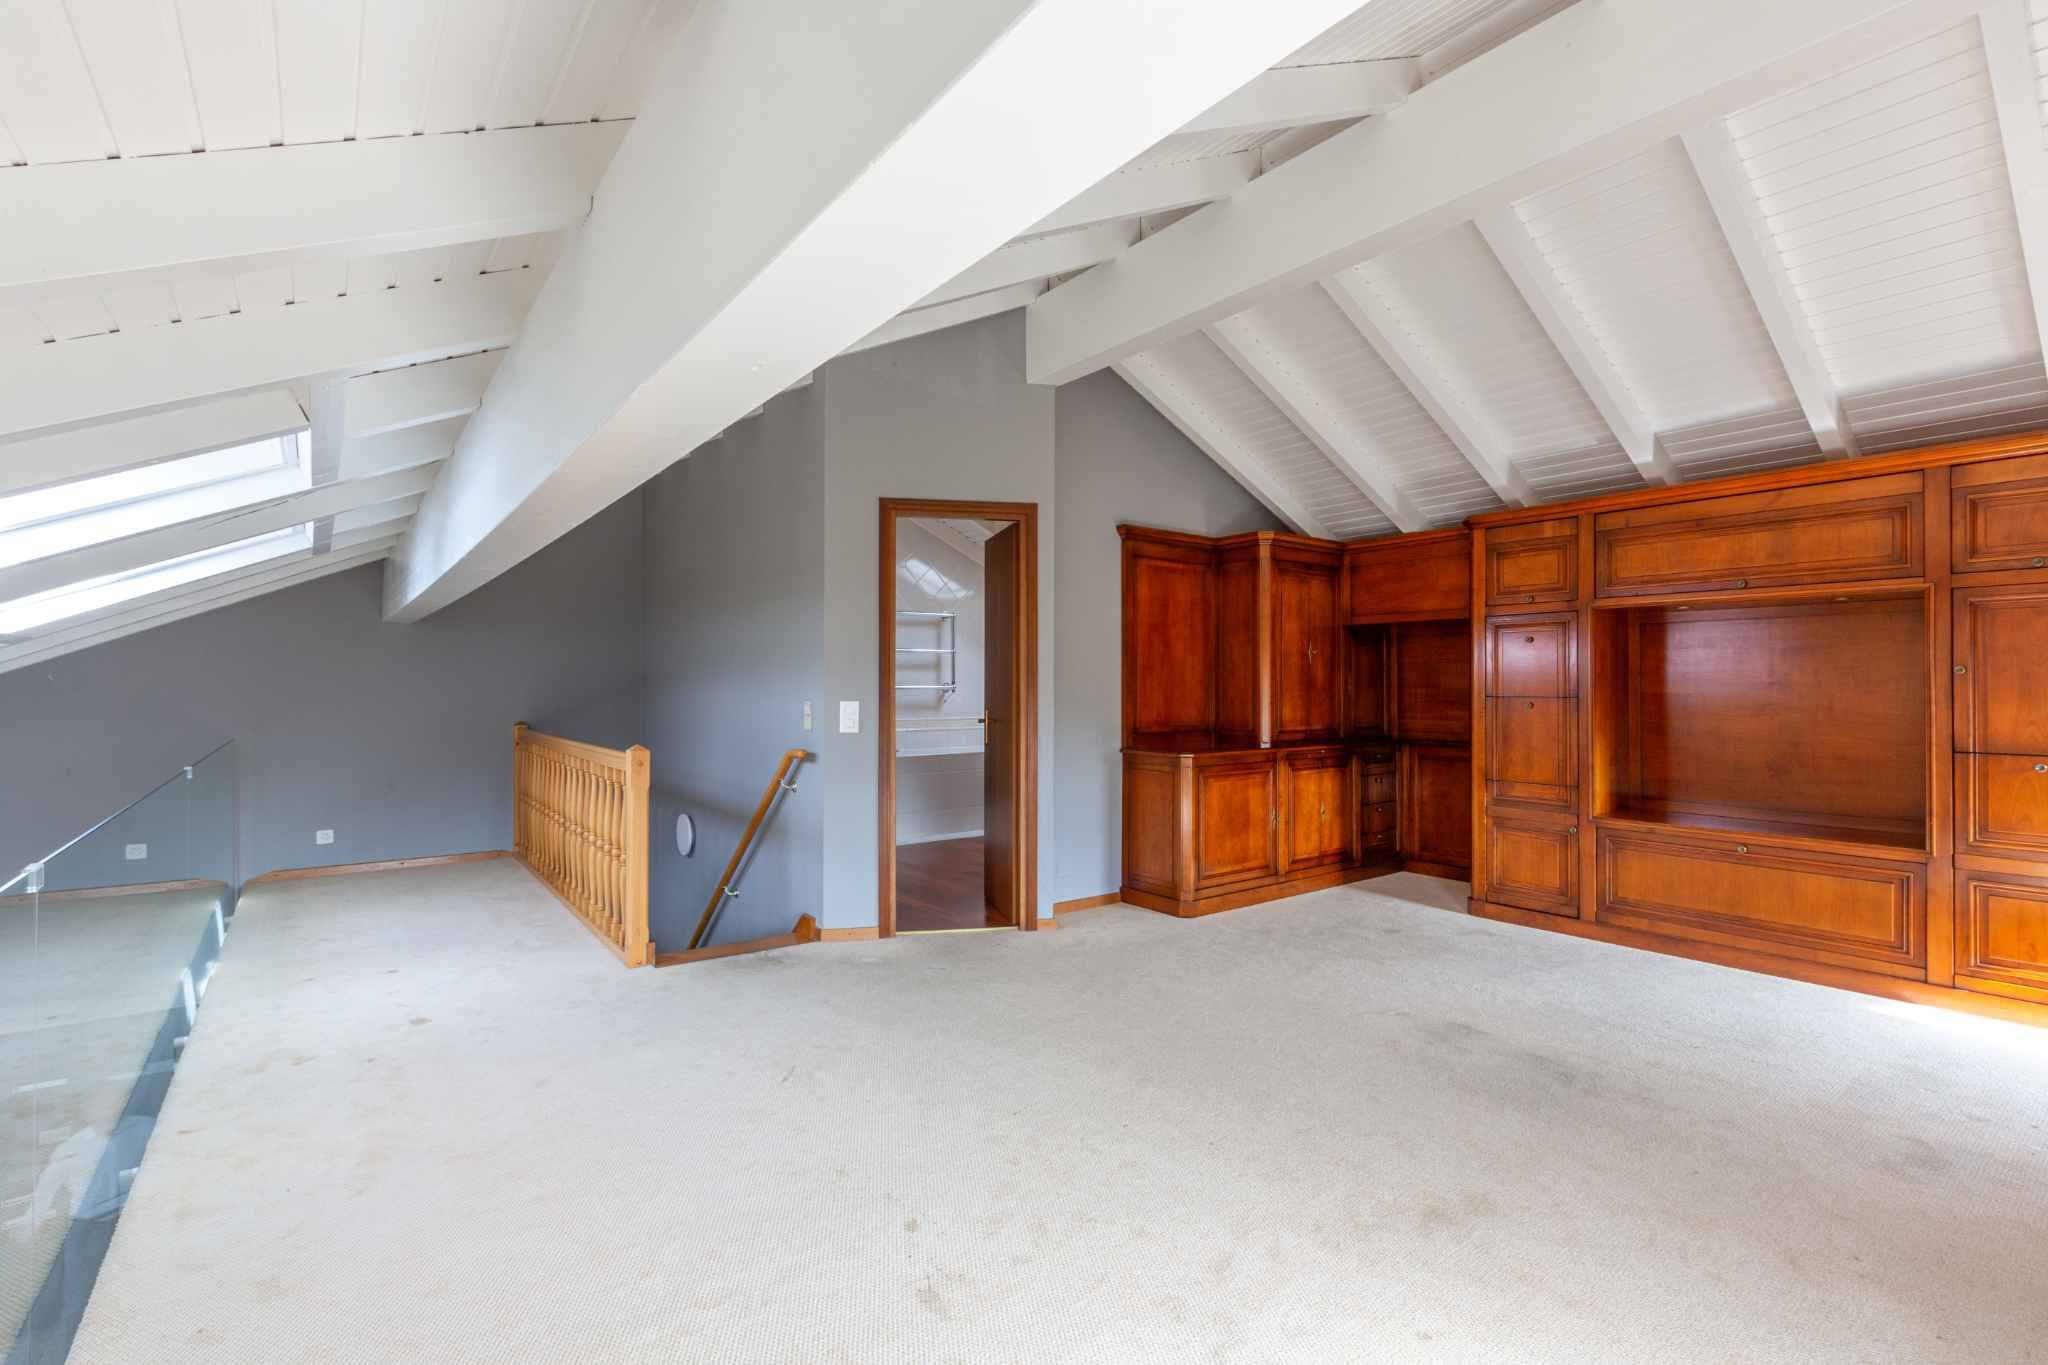 À vendre : Appartement 1 chambres Bogis-Bossey - Ref : 38881 | Naef Immobilier